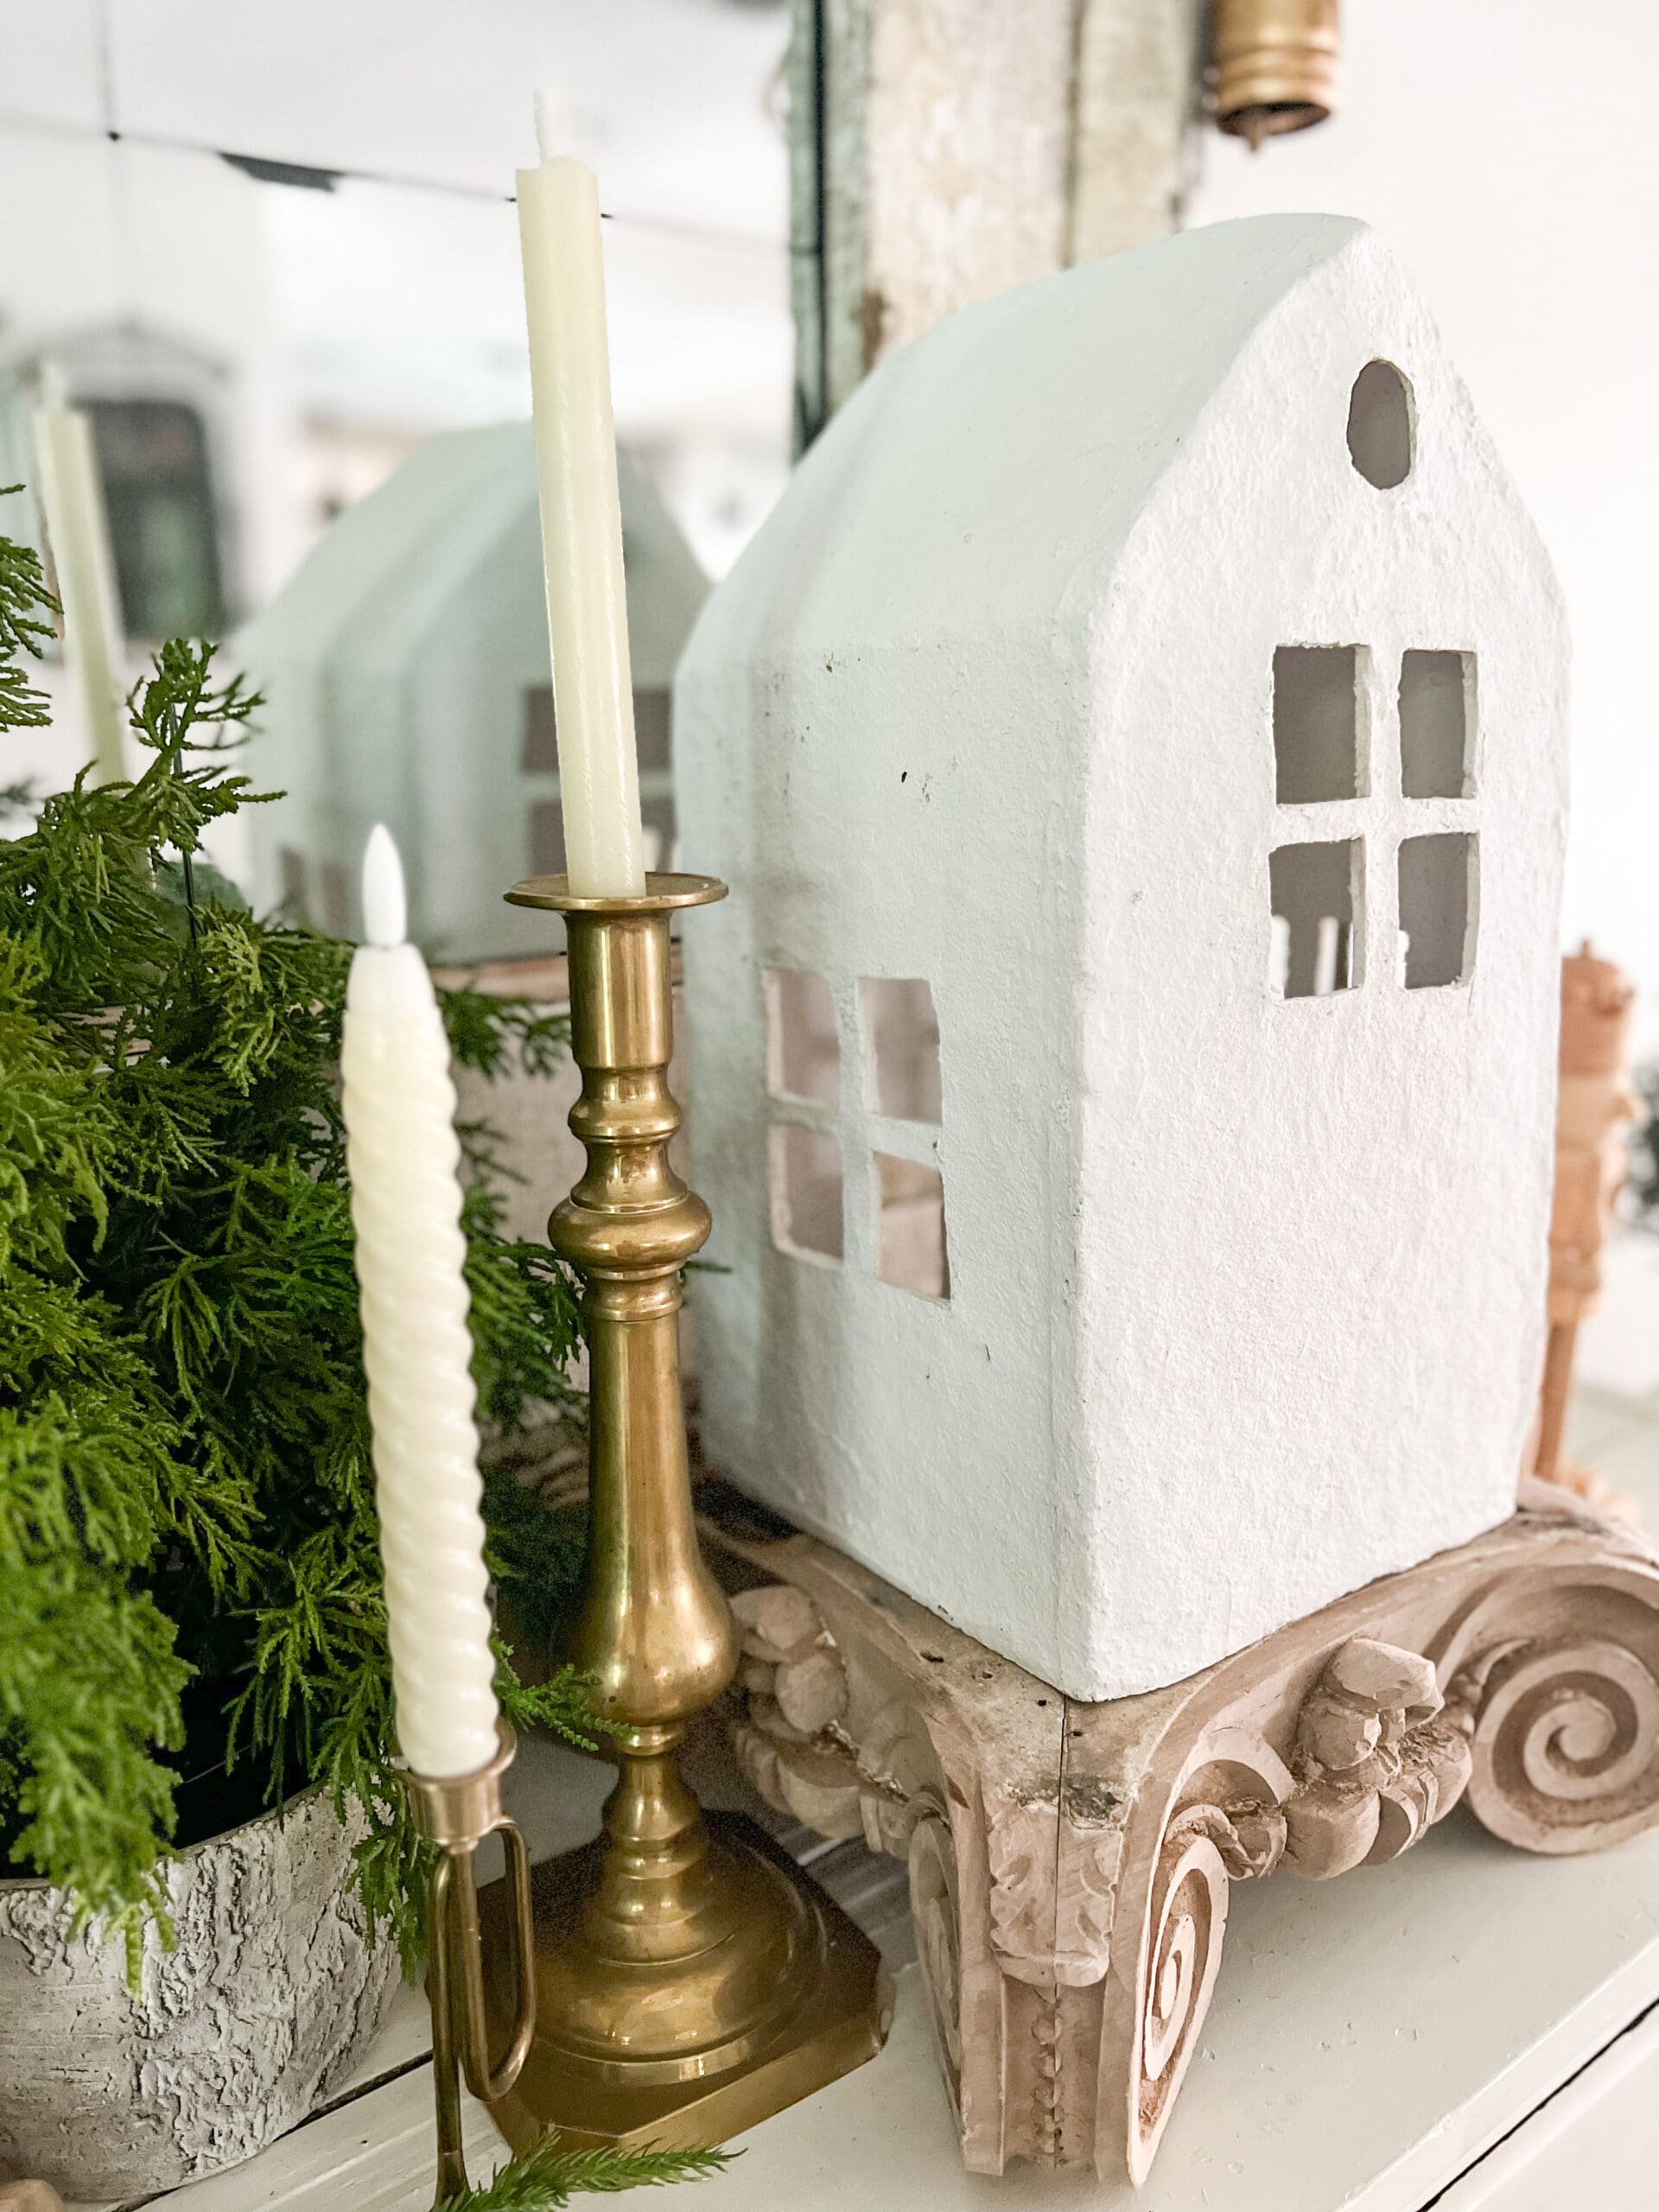 view of a small White House on a piece of wooden architectural salvage next to a golden candlestick